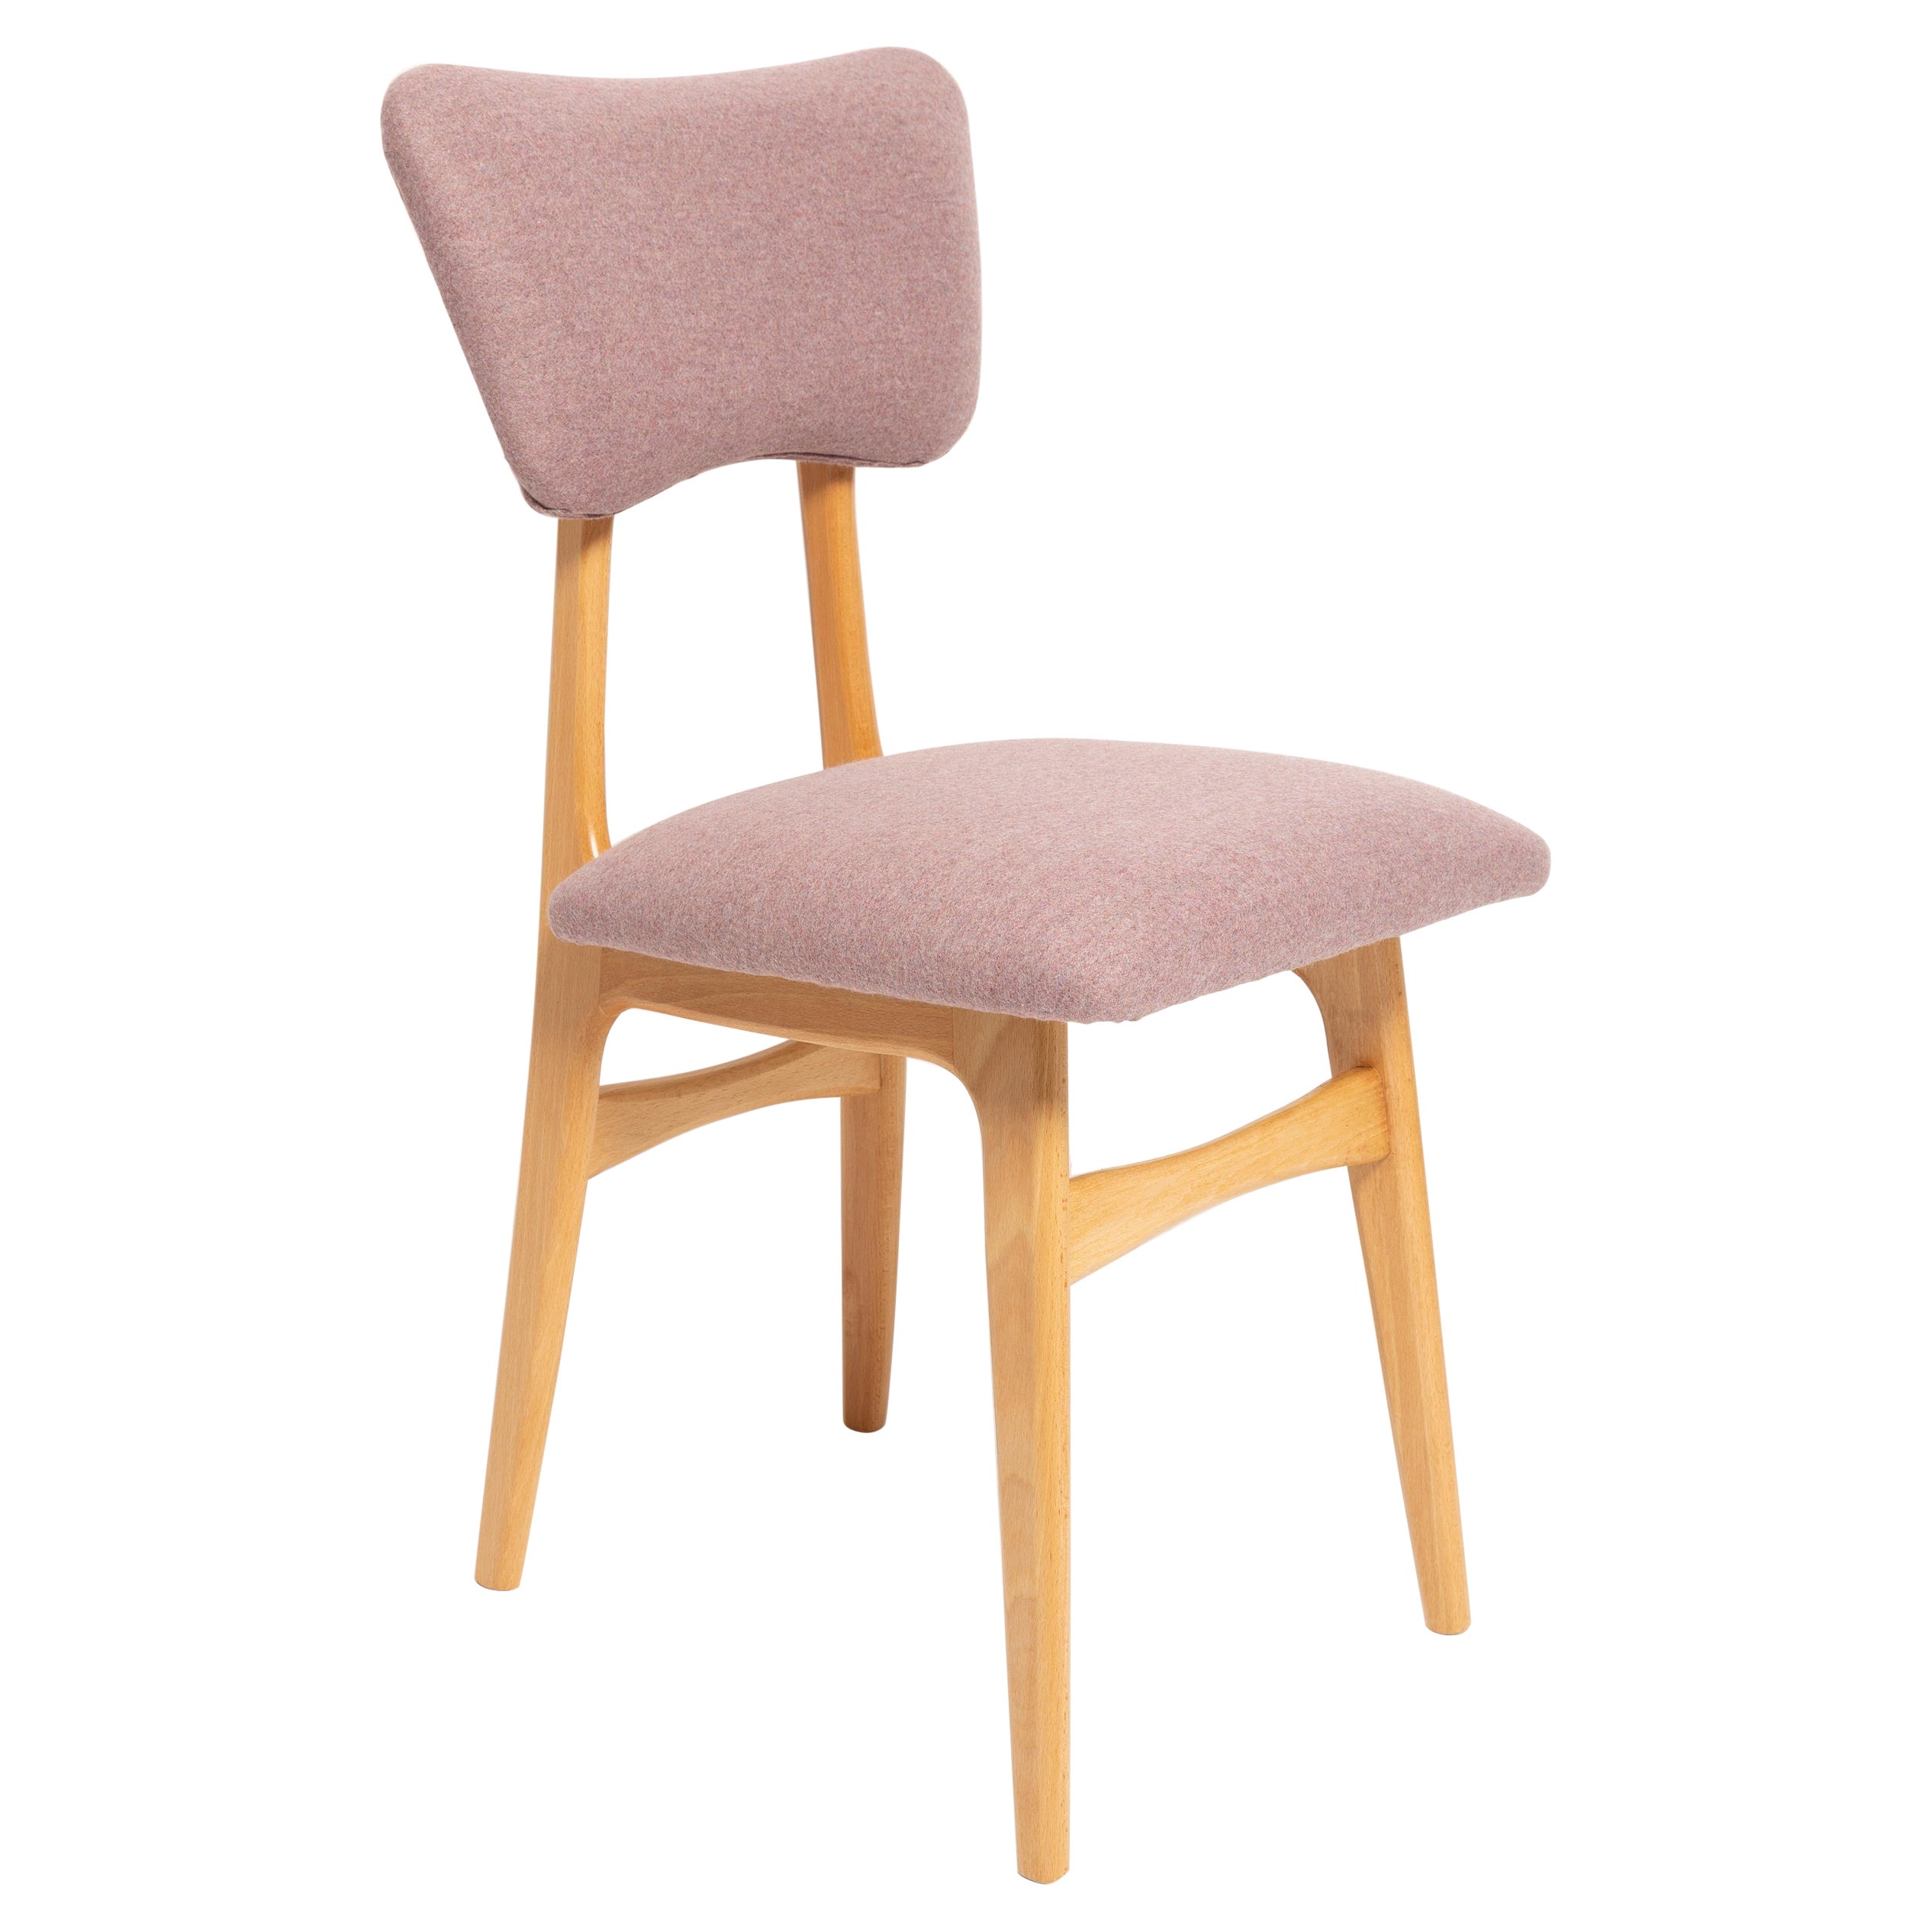 Butterfly Dining Chair, Pink Wool, Light Wood, Europe